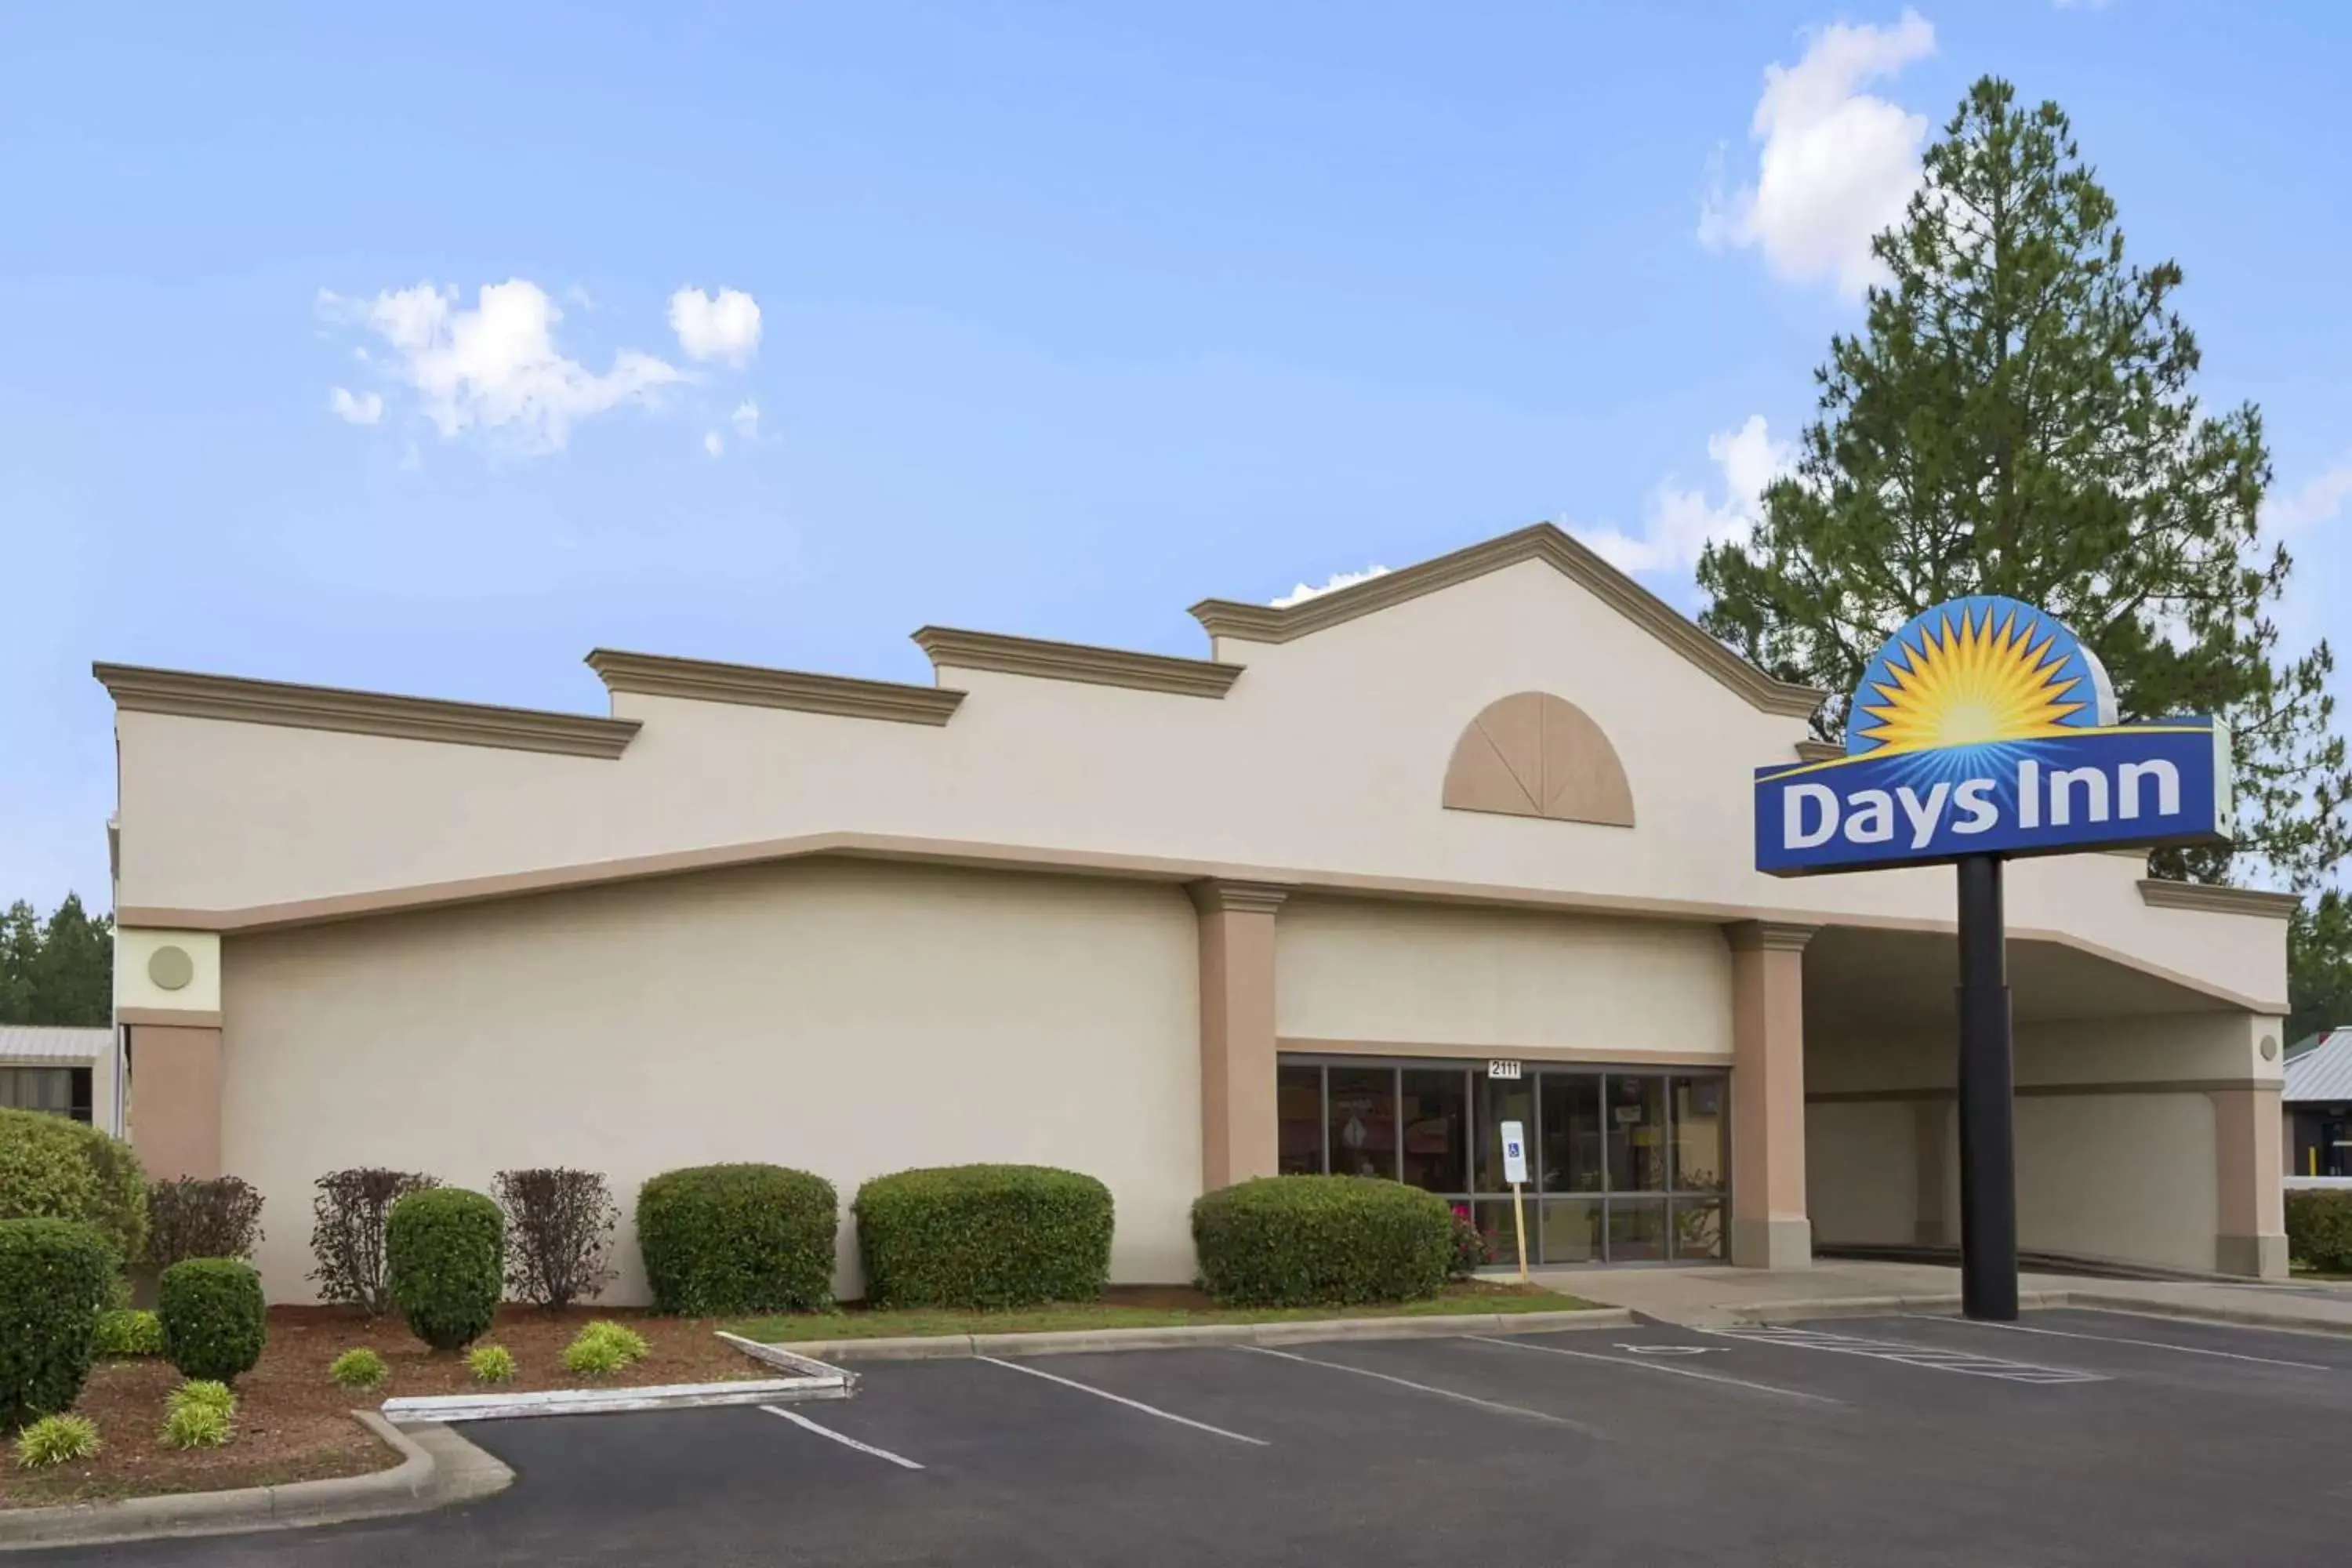 Property building in Days Inn by Wyndham Fayetteville-South/I-95 Exit 49